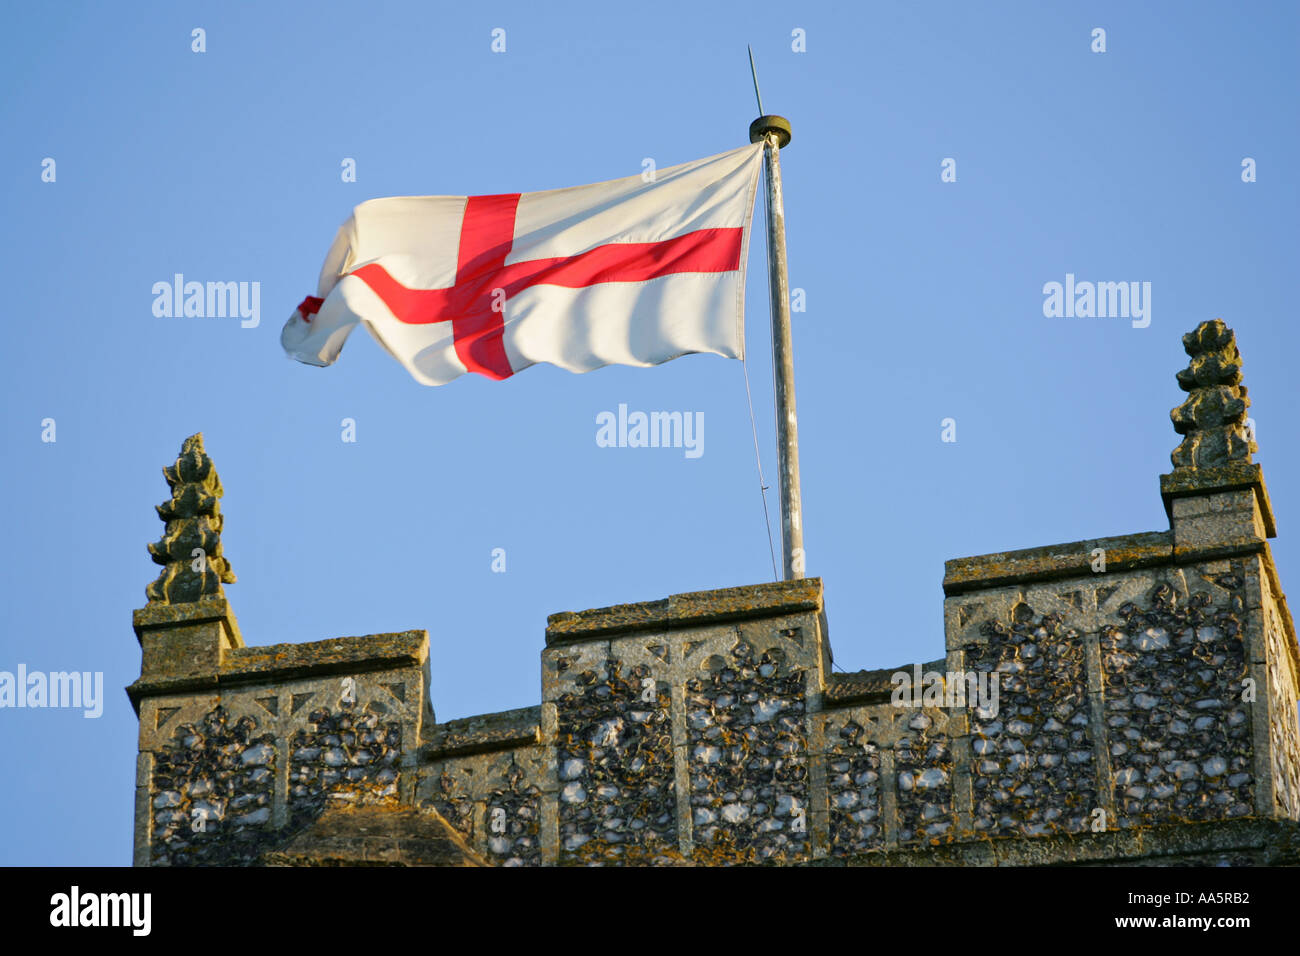 The Saint Georges cross national flag of England flies on top of a typical English village Church tower Wroxham Norfolk England Stock Photo